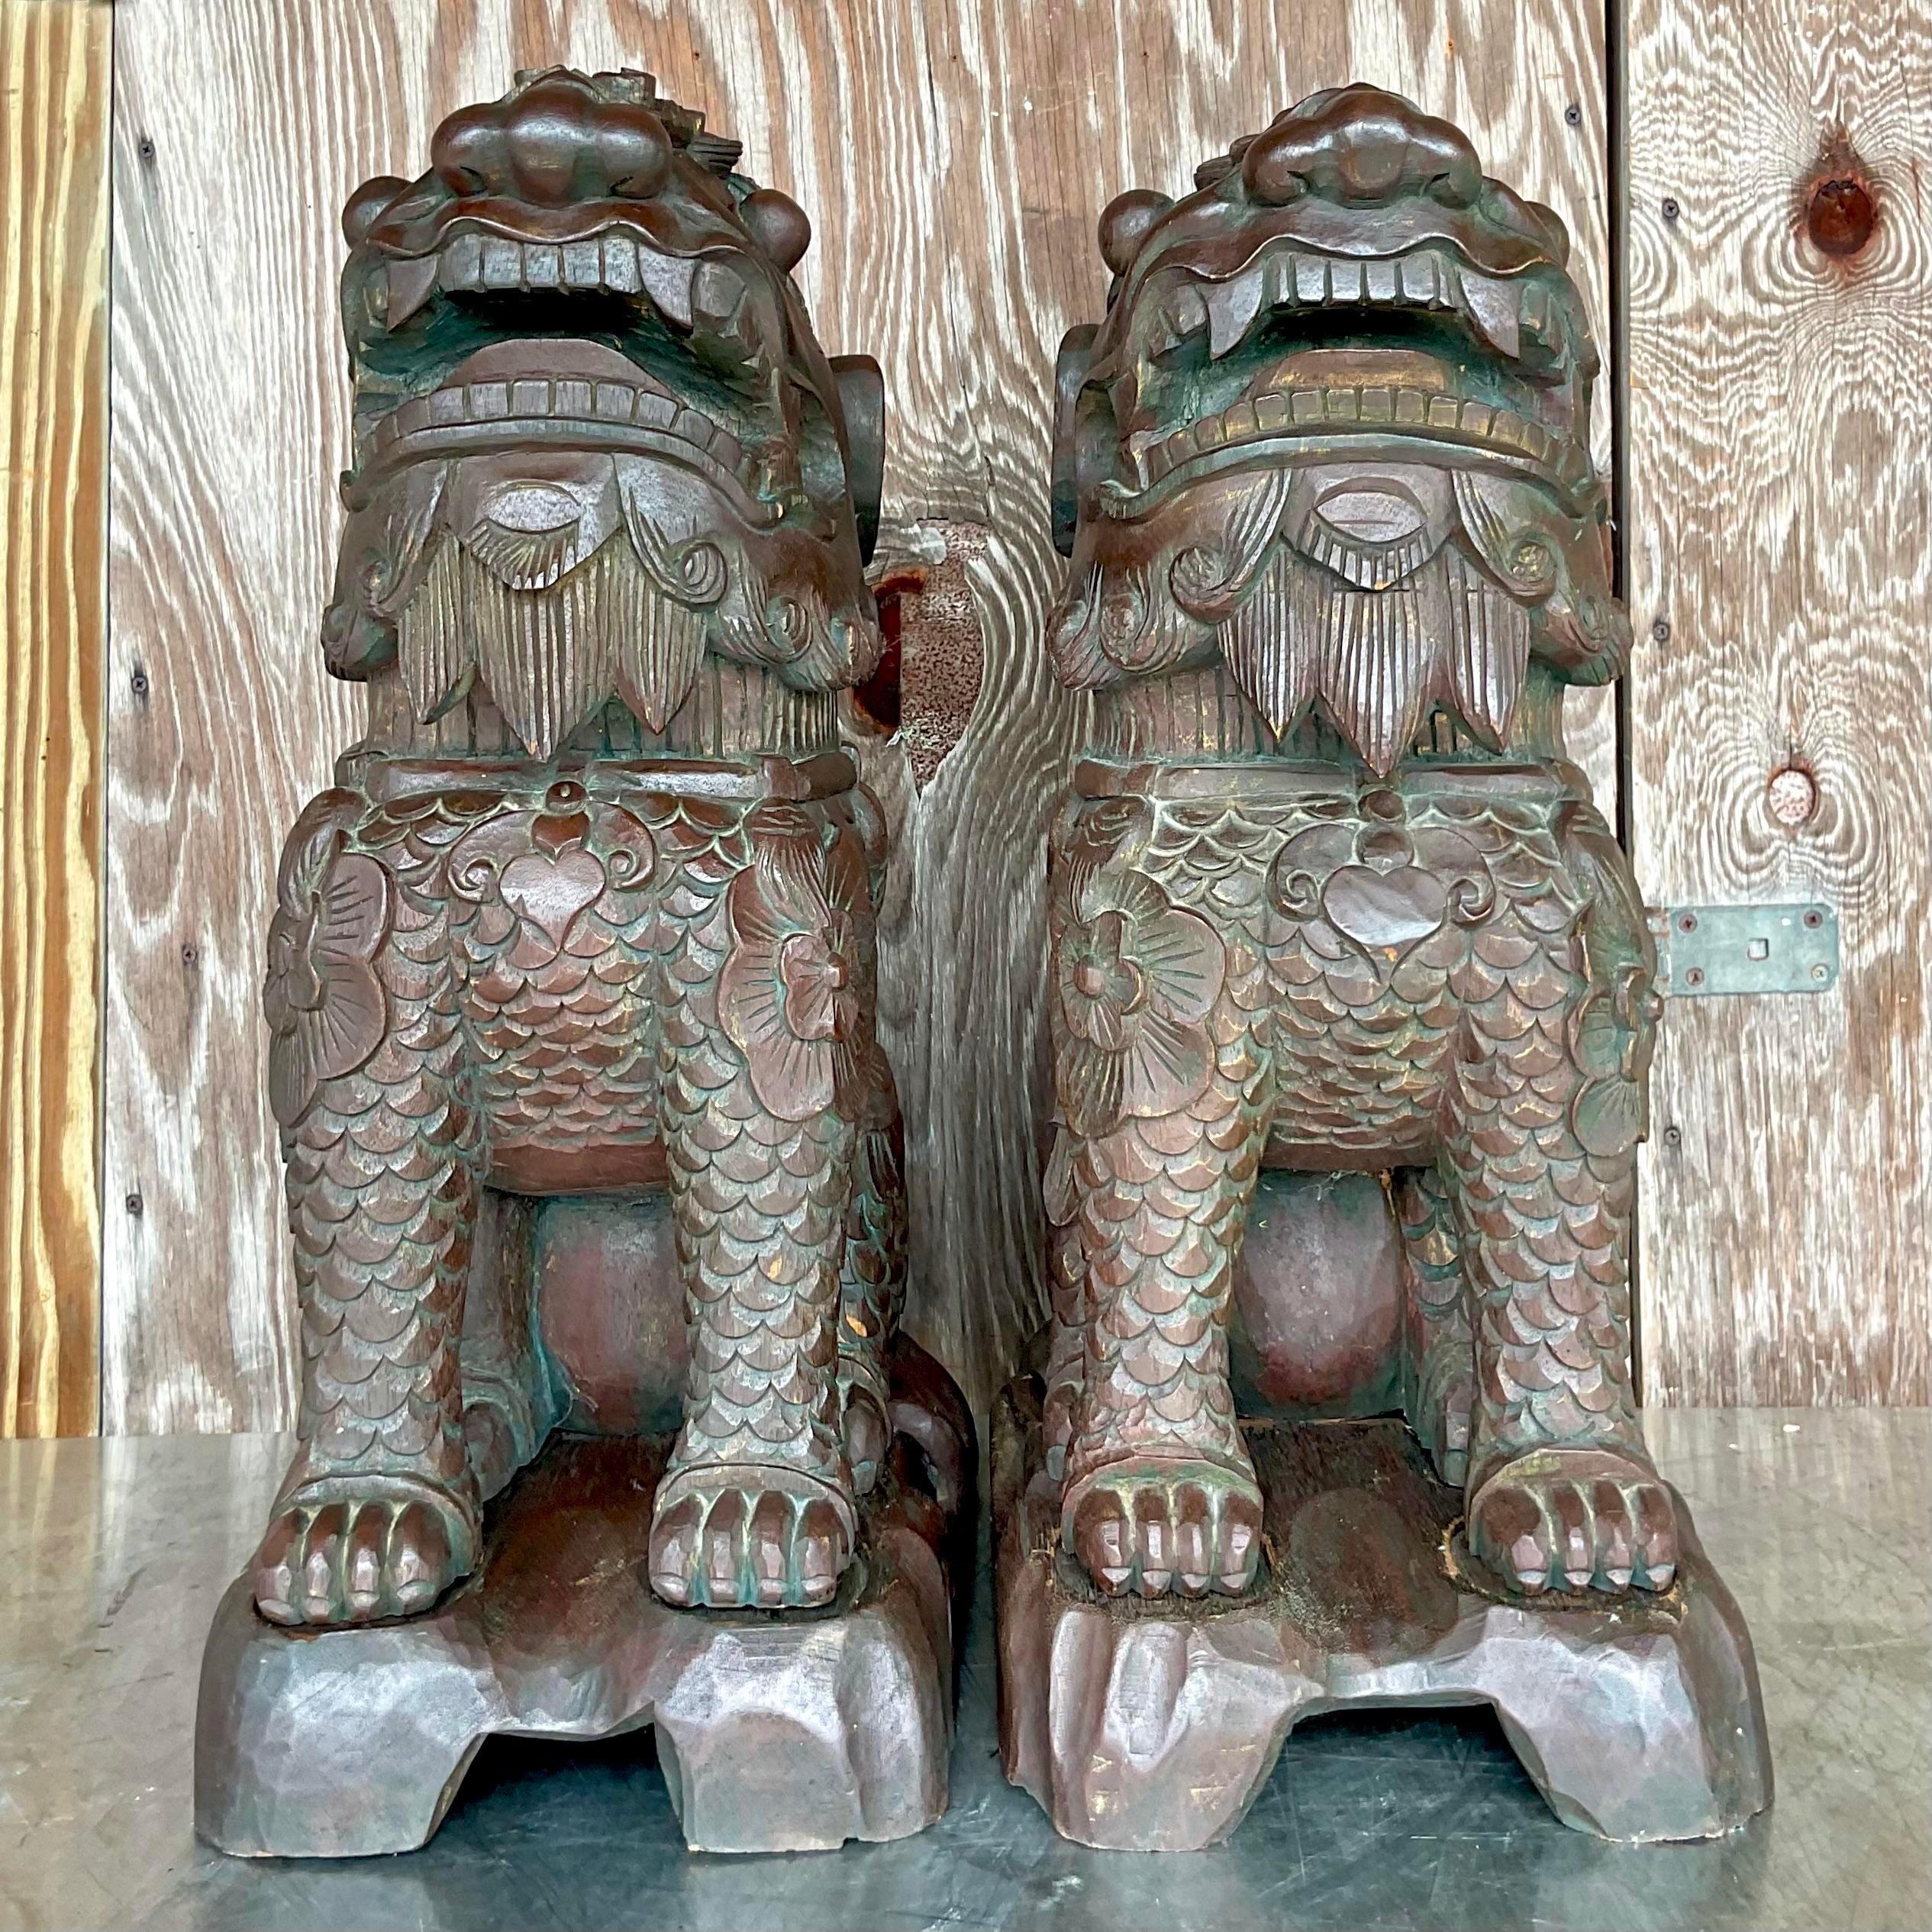 A striking pair of vintage Asian Foo dogs. A beautiful hand carved pair with incredible attention to detail. Monumental in size and drama. Acquired from a Palm Beach estate.